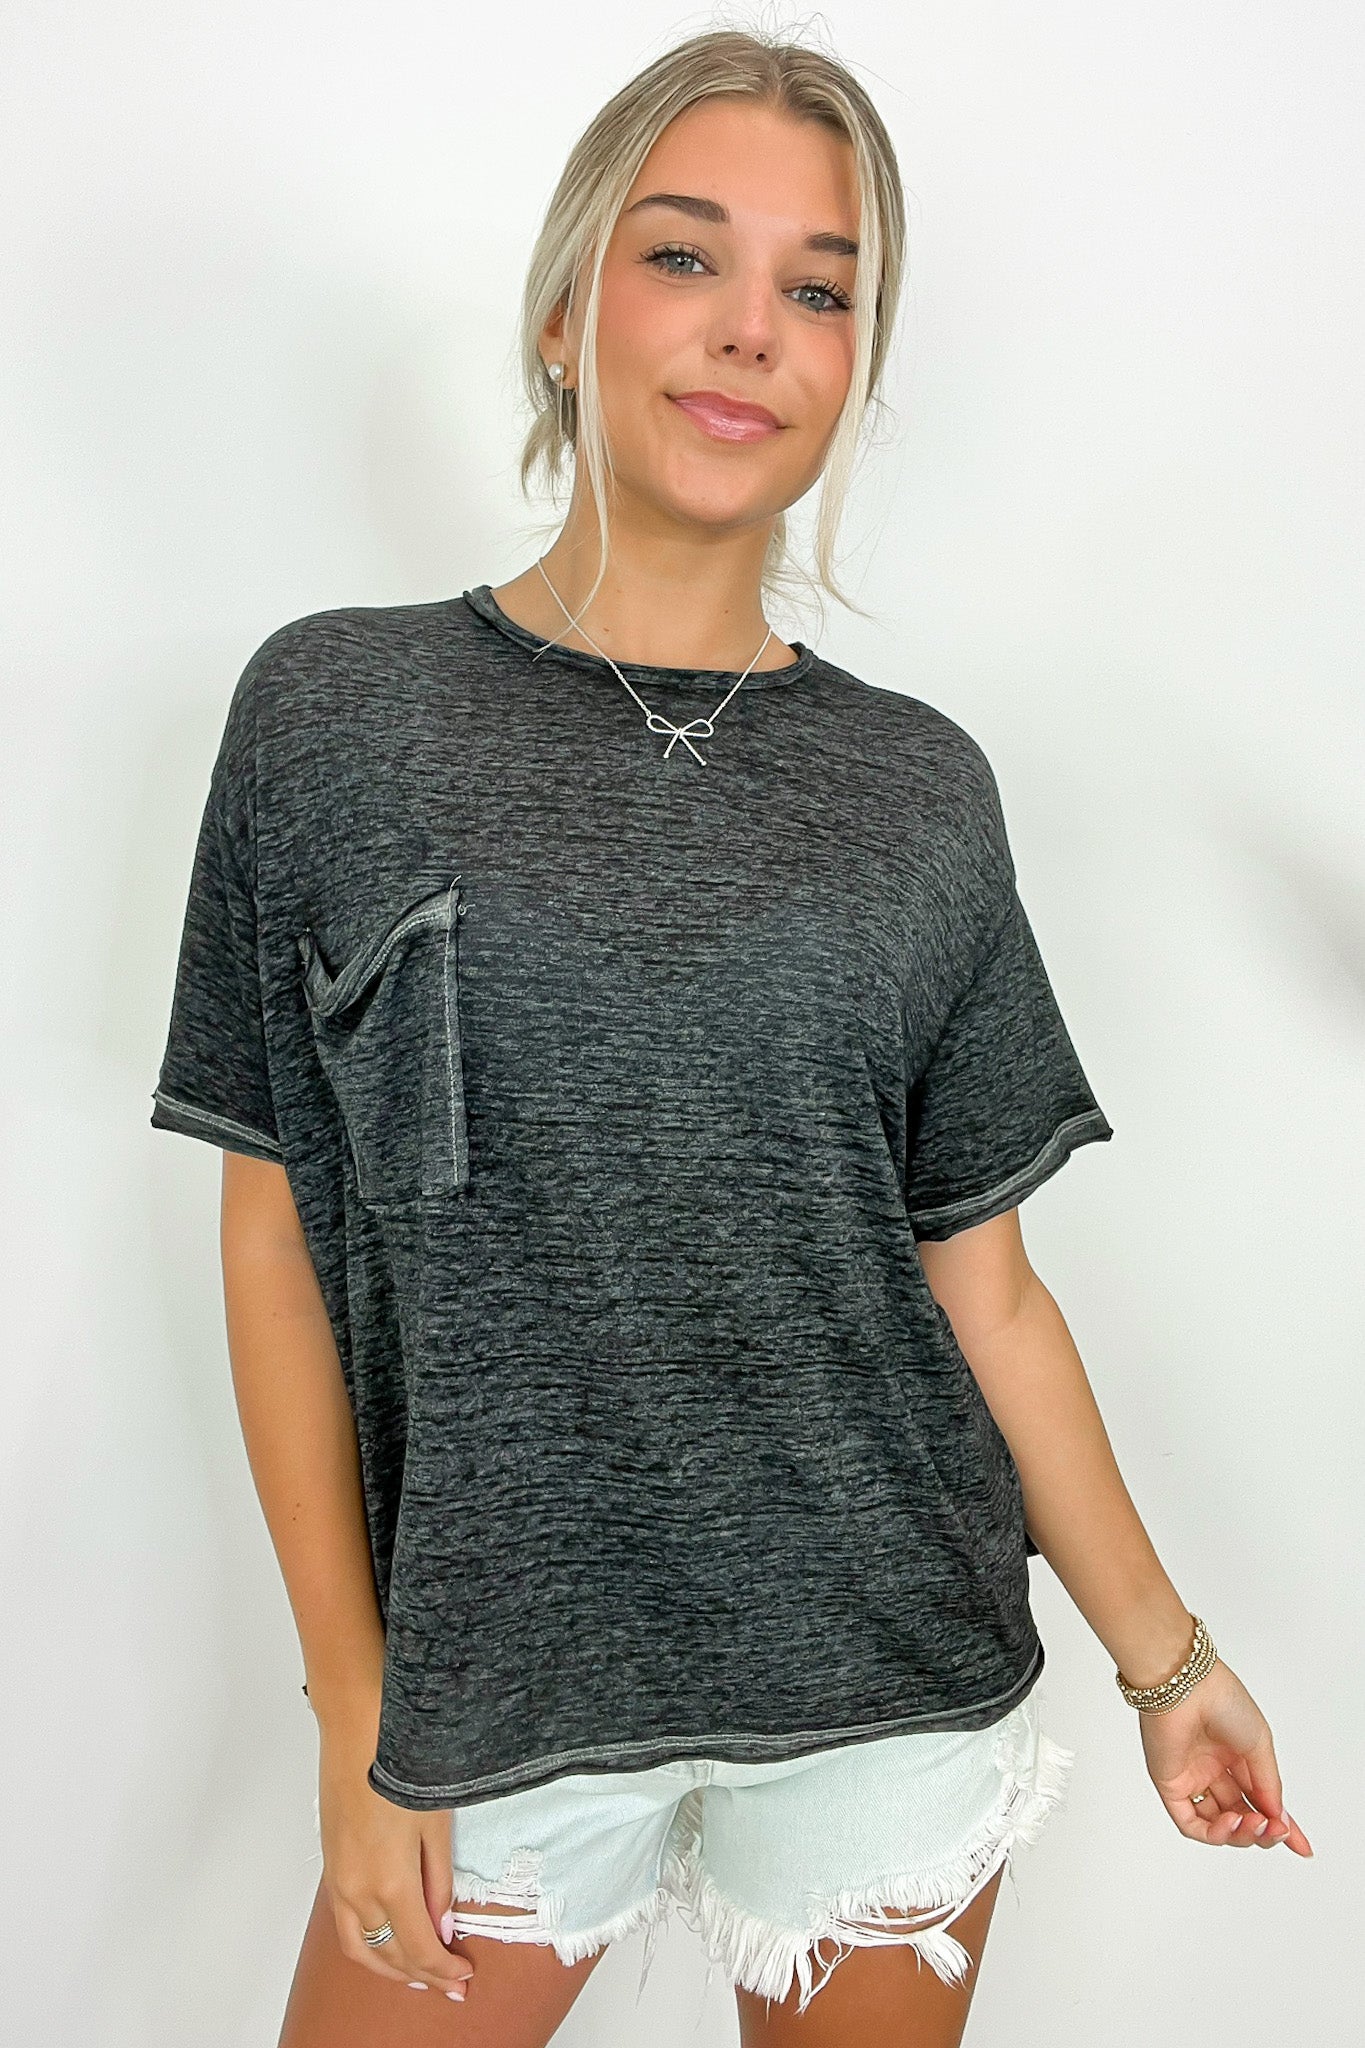 Ash Black / SM Marisol Burnout Wash Oversized Pocket Top - BACK IN STOCK - Madison and Mallory